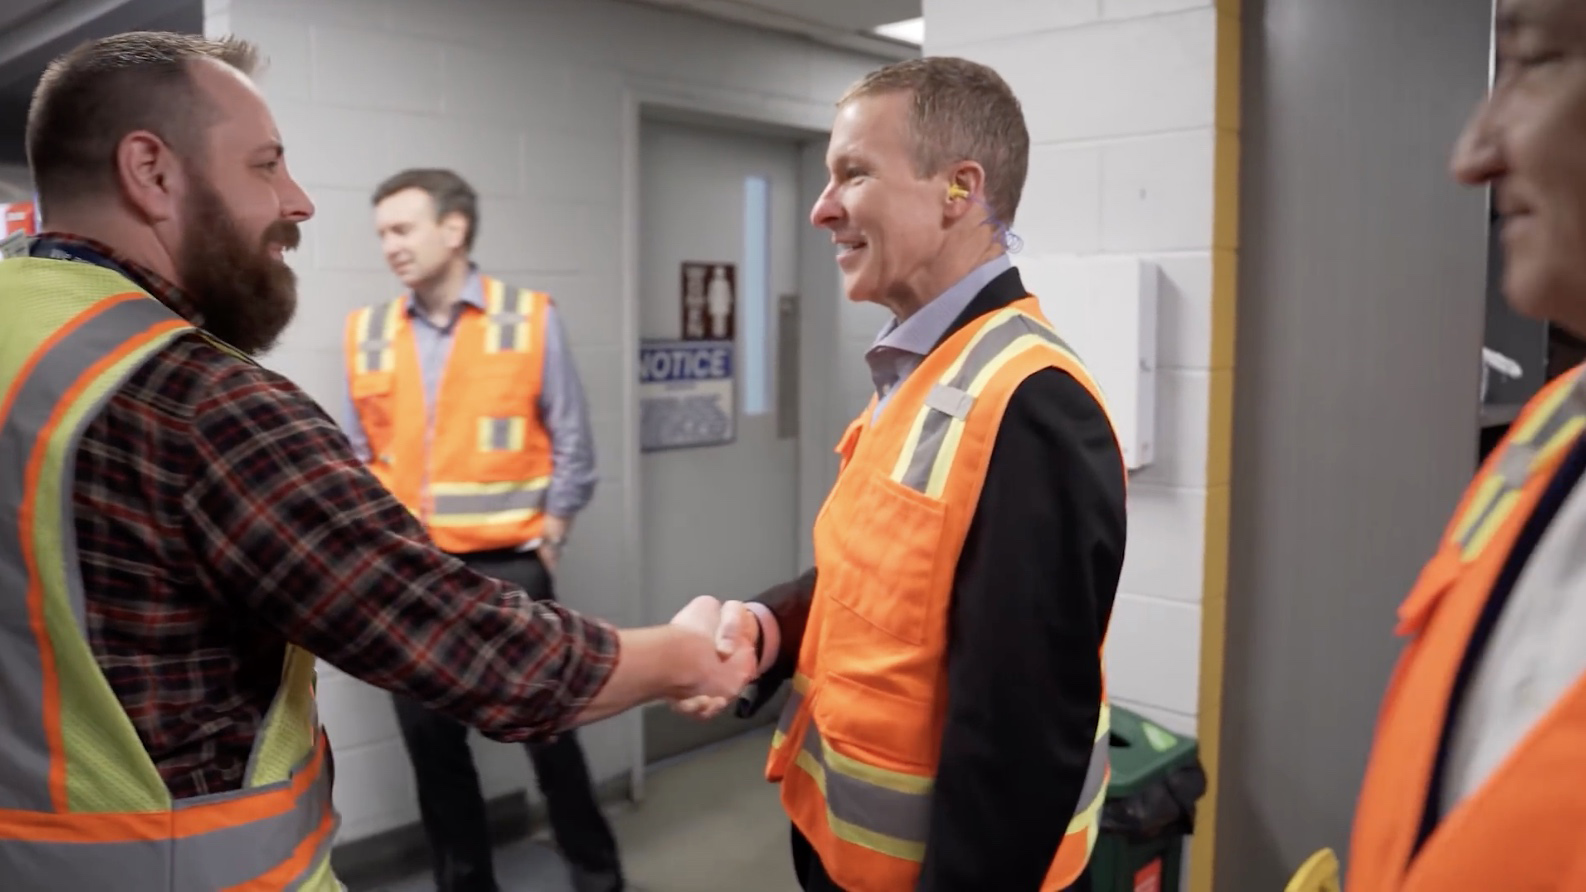 a man in safety vest shaking hands with another man in safety vest